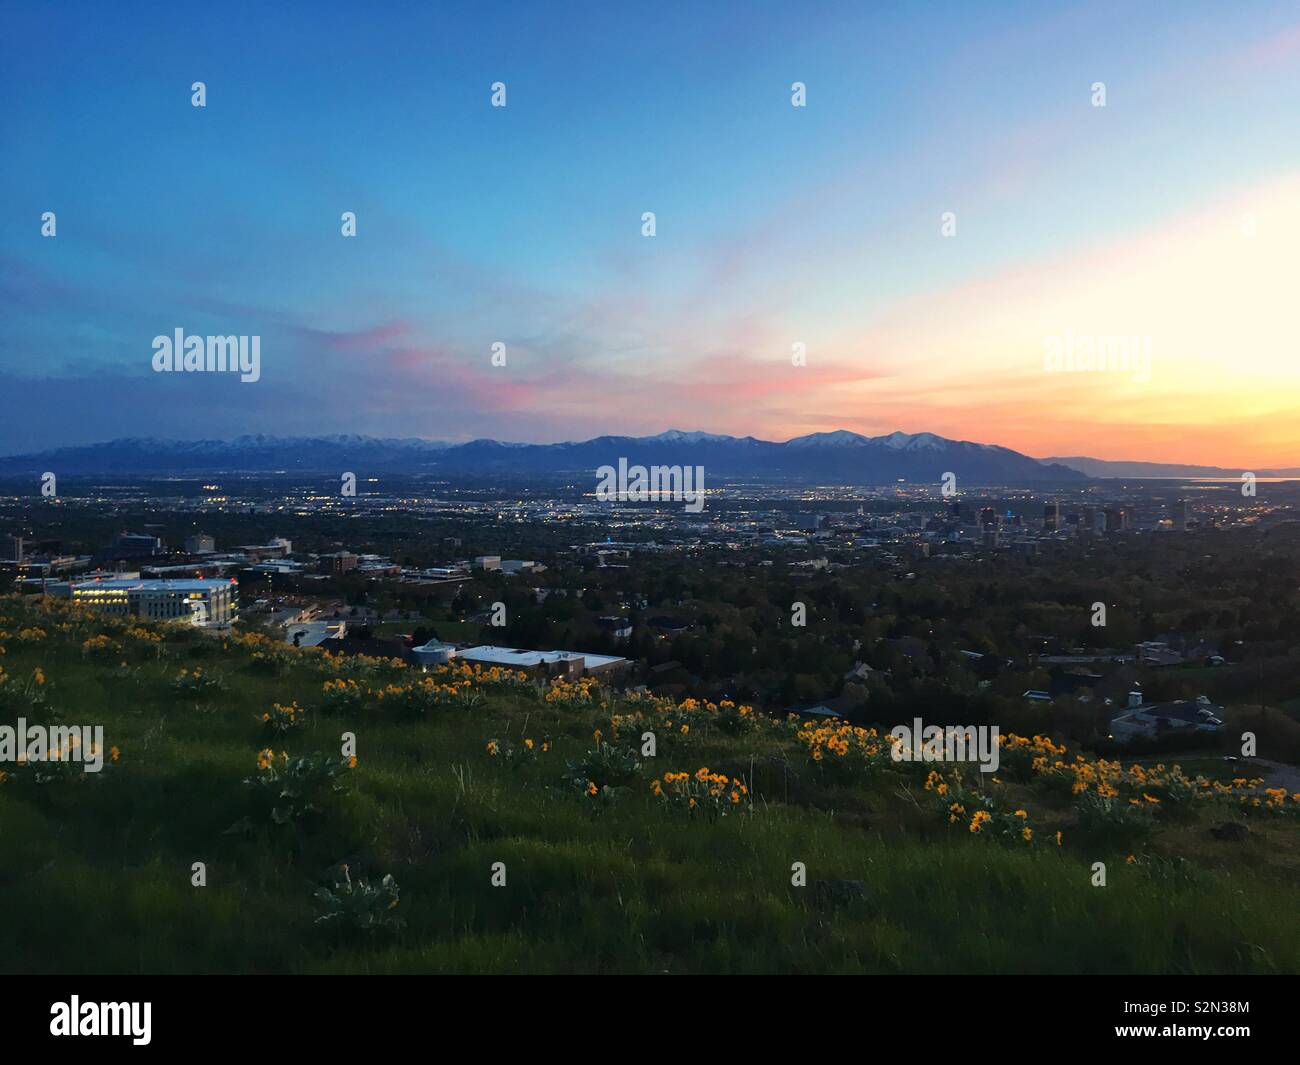 A spring sunset from the foothills of Salt Lake City, Utah Stock Photo